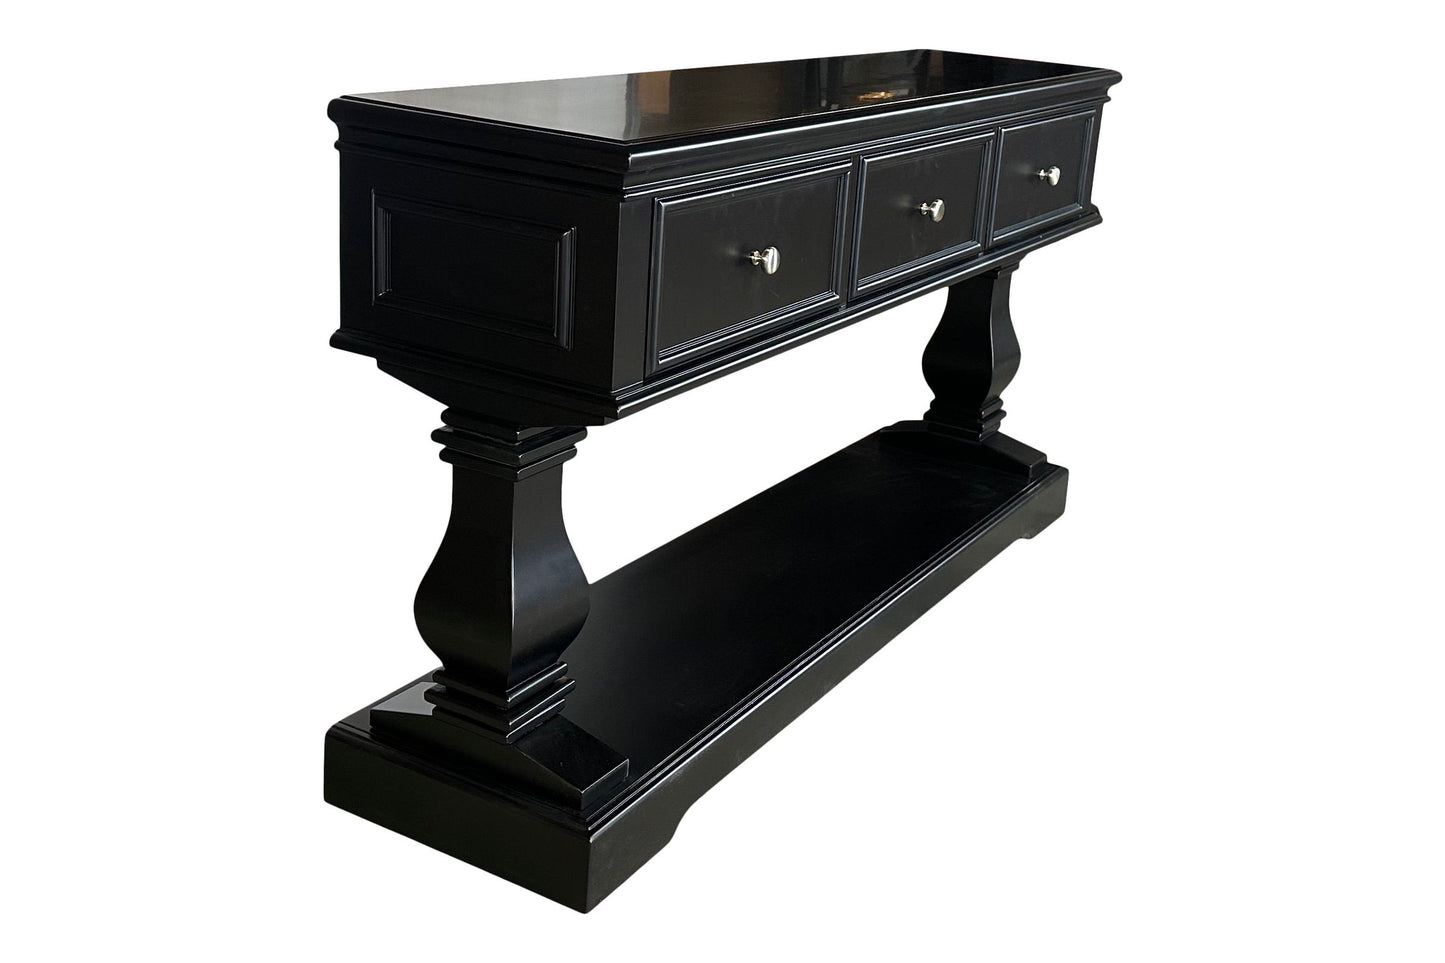 Midnight Console Table